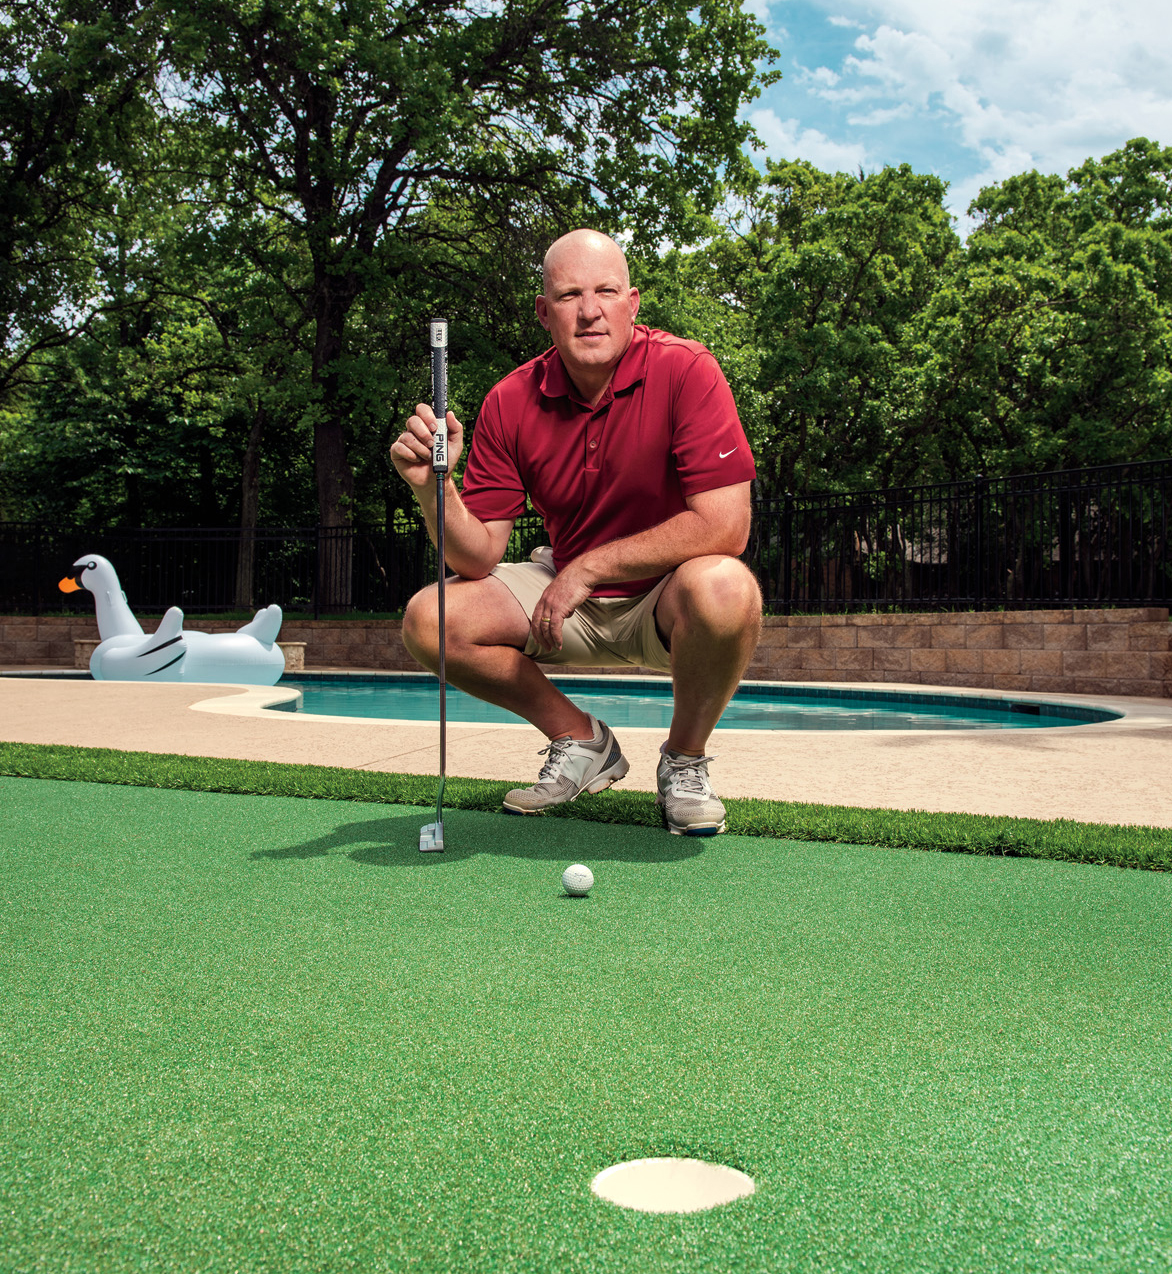 How To Build Putting Green Do It Yourself Golf: Putting Greens | Golf Digest